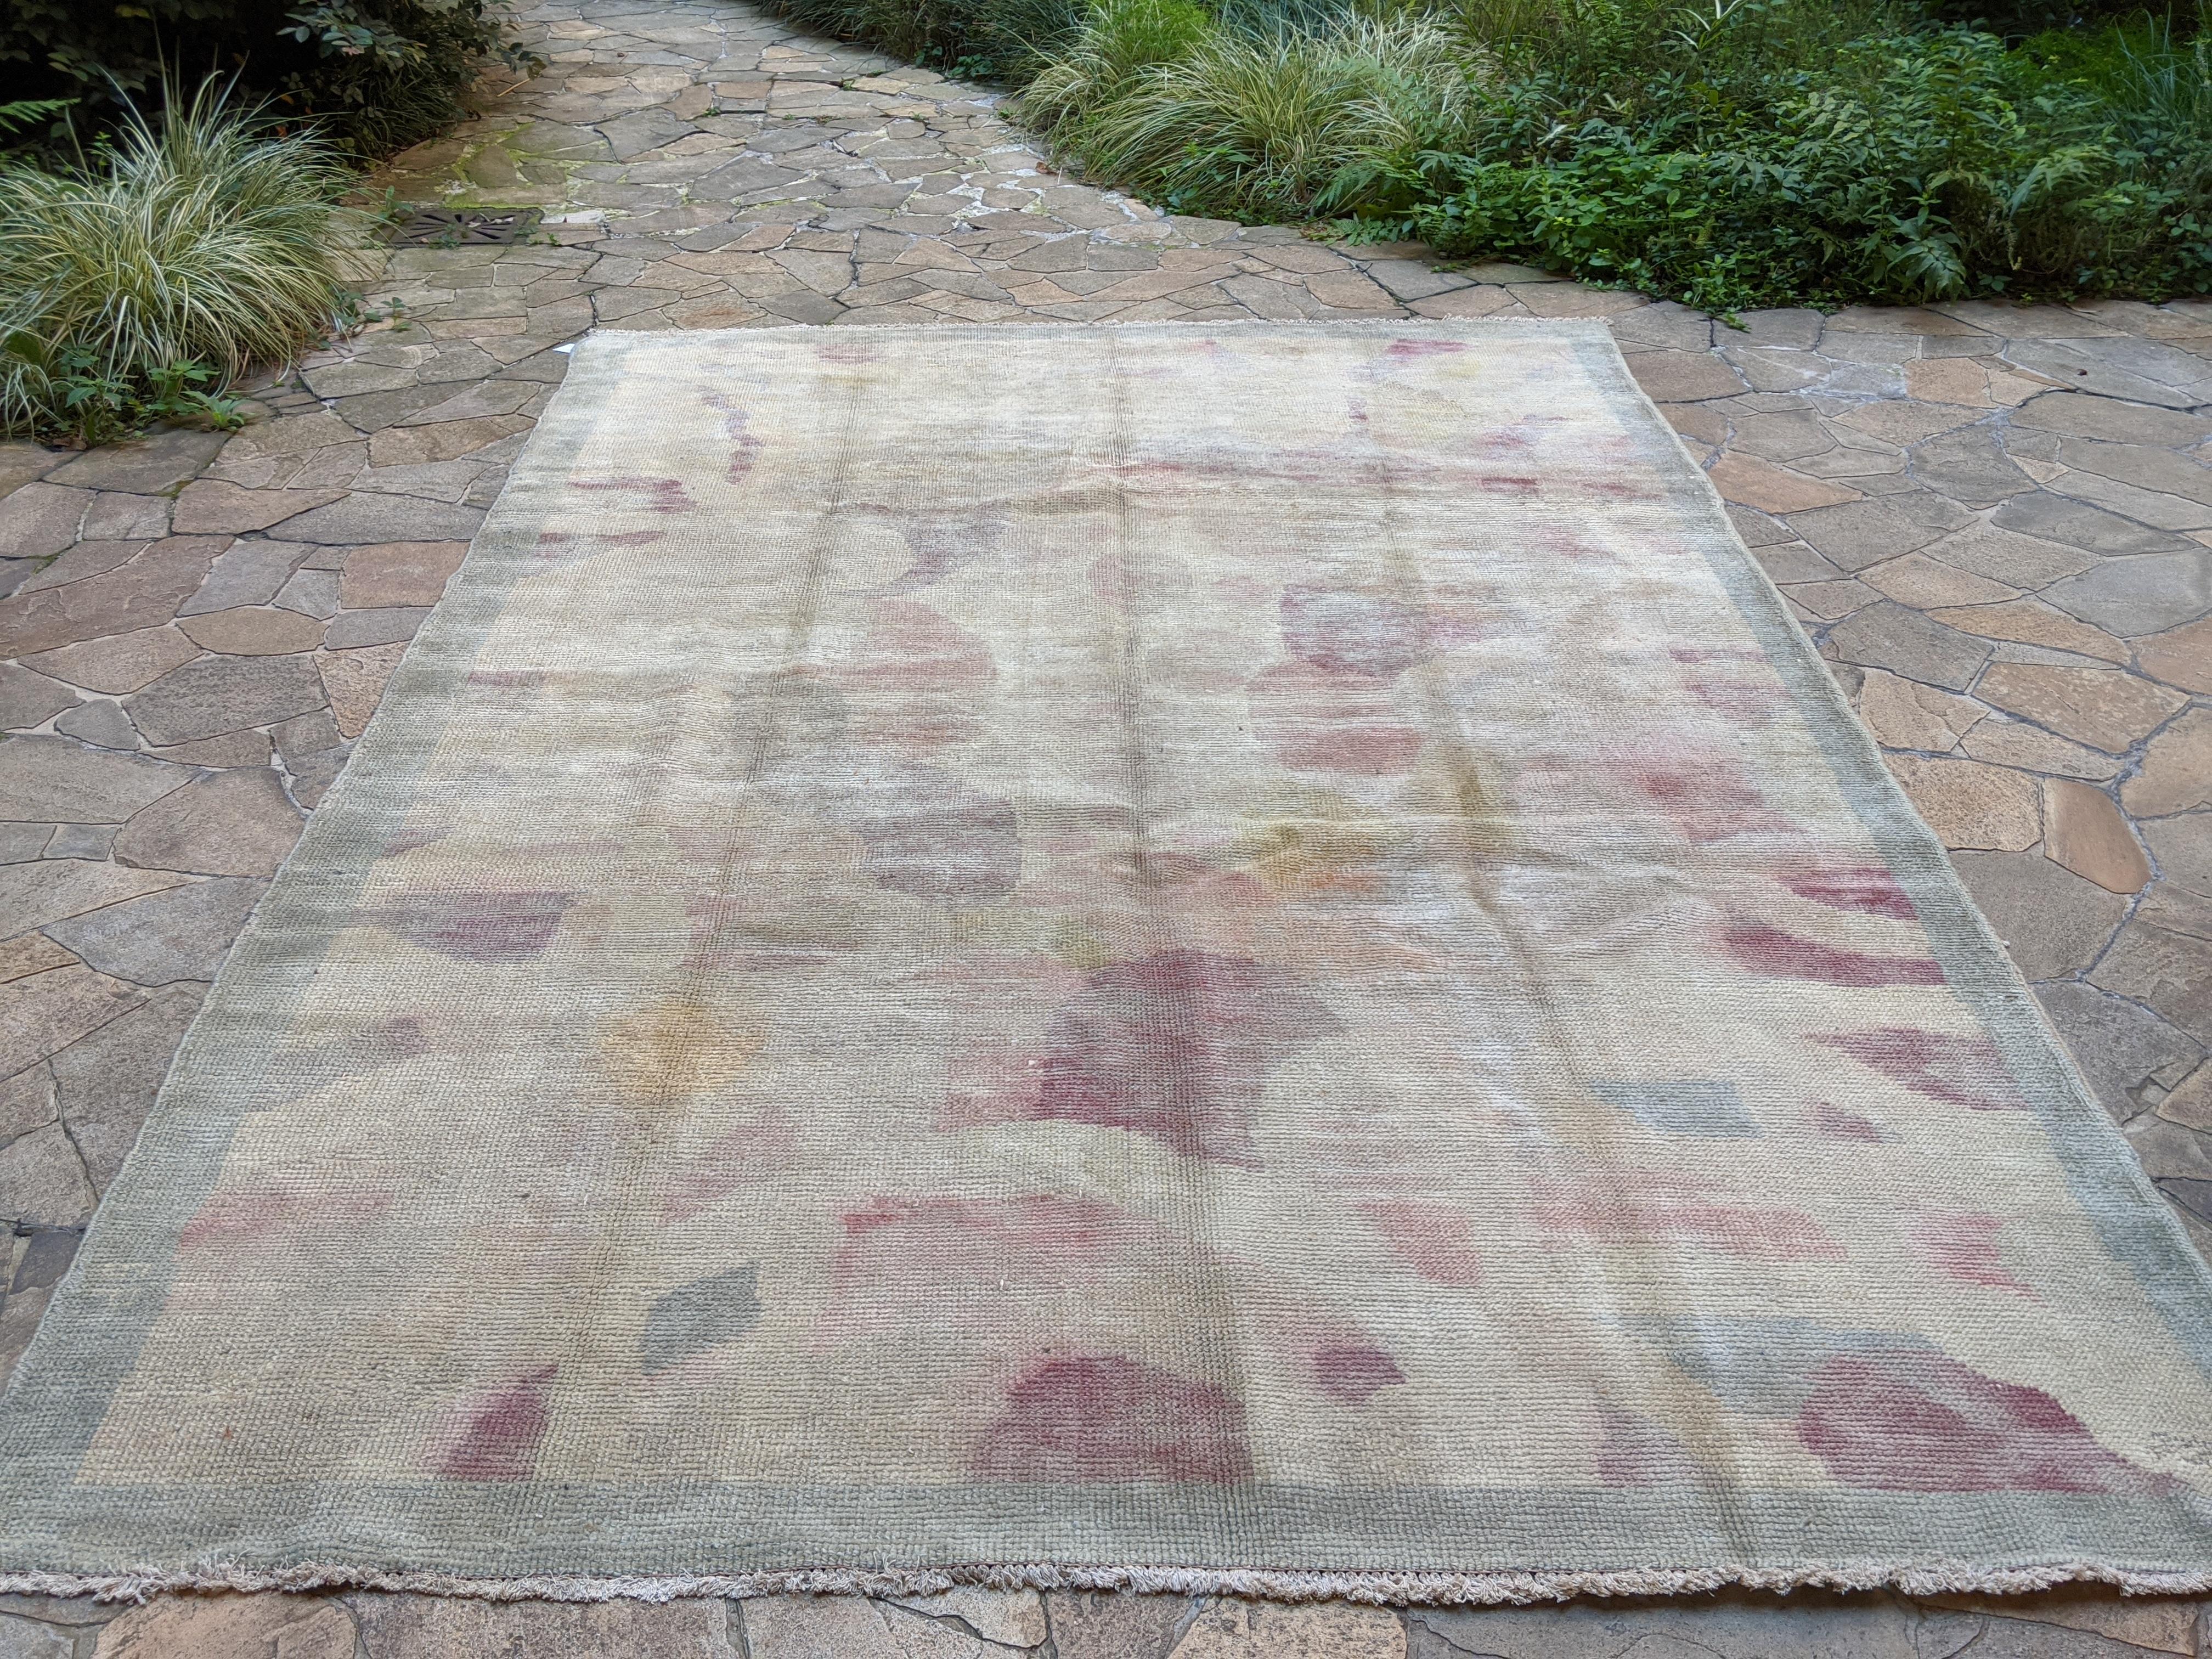 Hand-Knotted French Art Deco Ivory Wool Rug with Pastel Colors Signed Solange Patry-Biè 